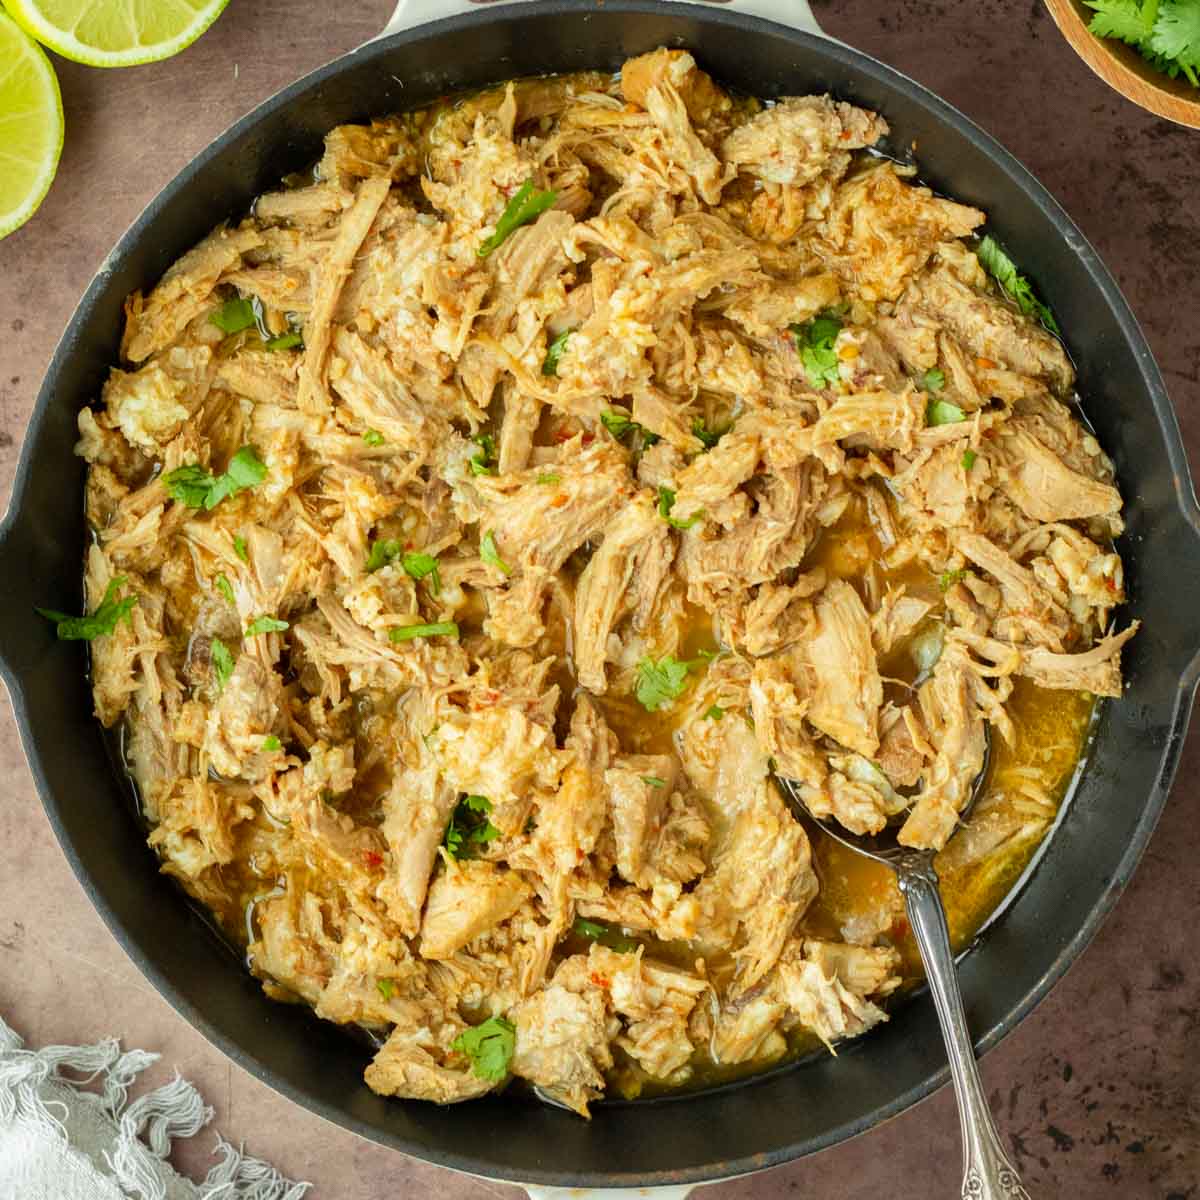 These crockpot pork carnitas are a flavorful and easy crockpot recipe made with pork loin generously seasoned and slow cooked in fresh orange and lime juice to make a flavorful shredded meat perfect for tacos, enchiladas and more.